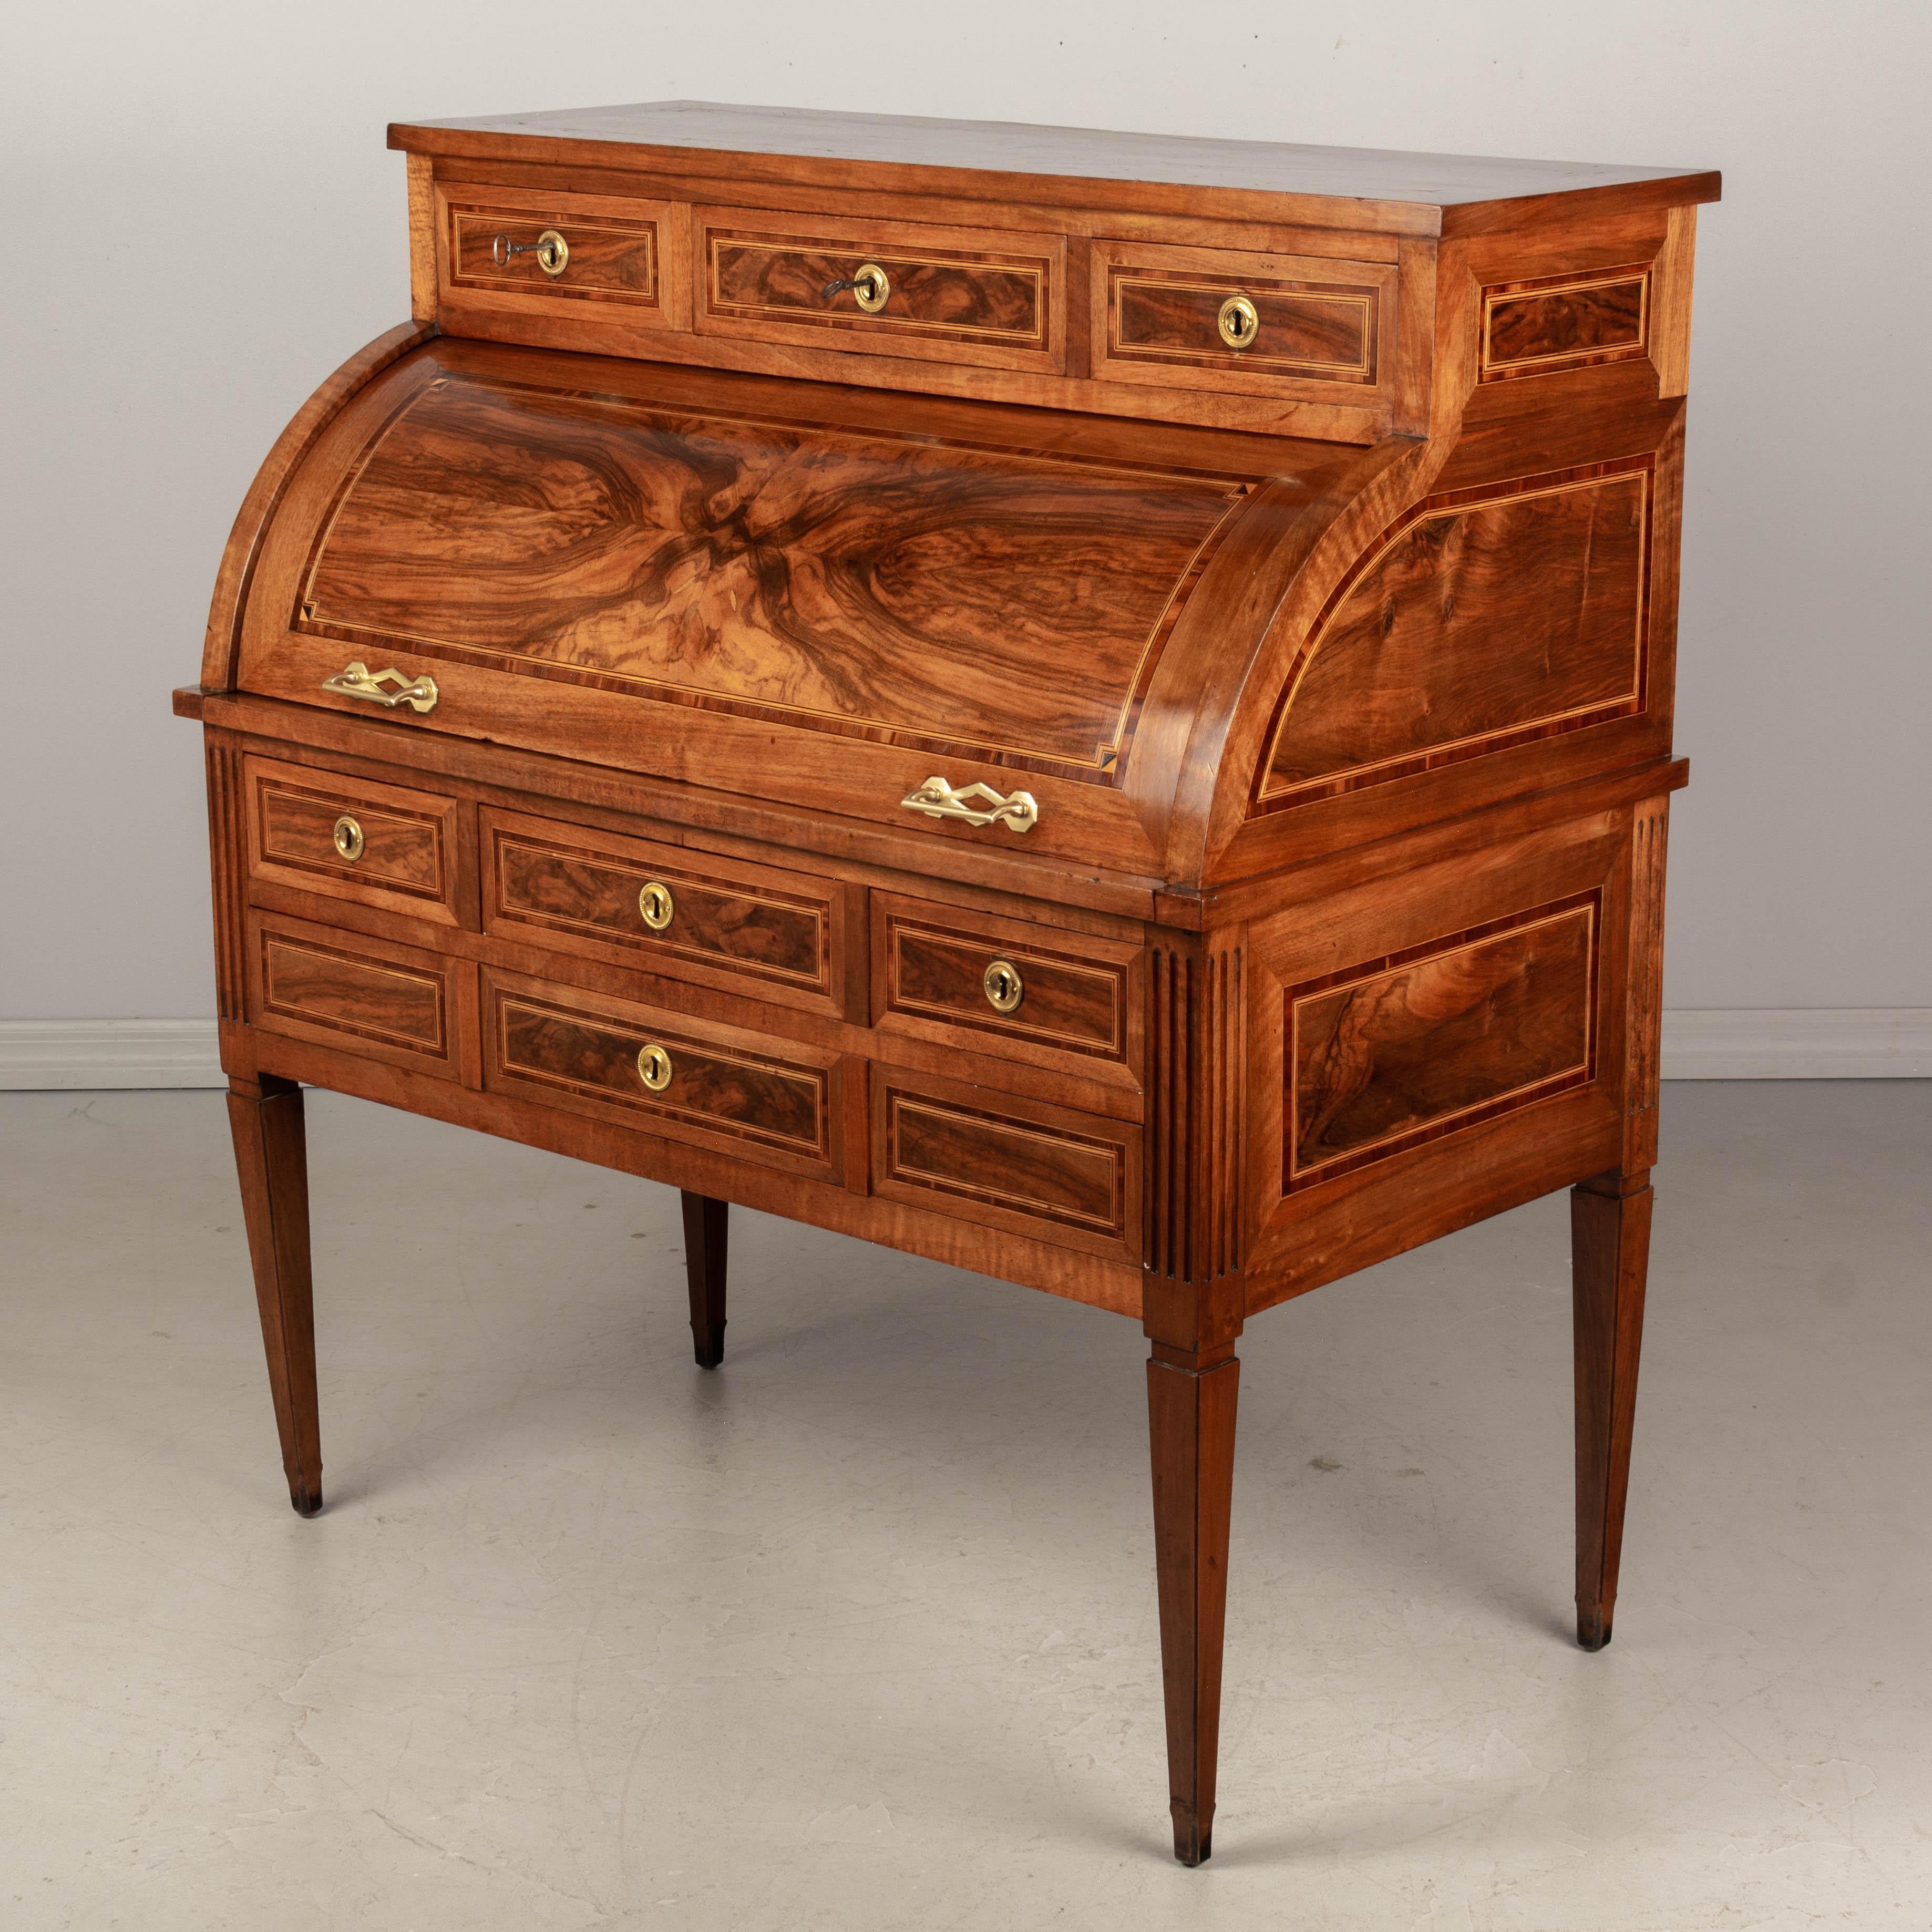 French 18th Century Louis XVI Bureau à Cylindre or Roll Top Desk